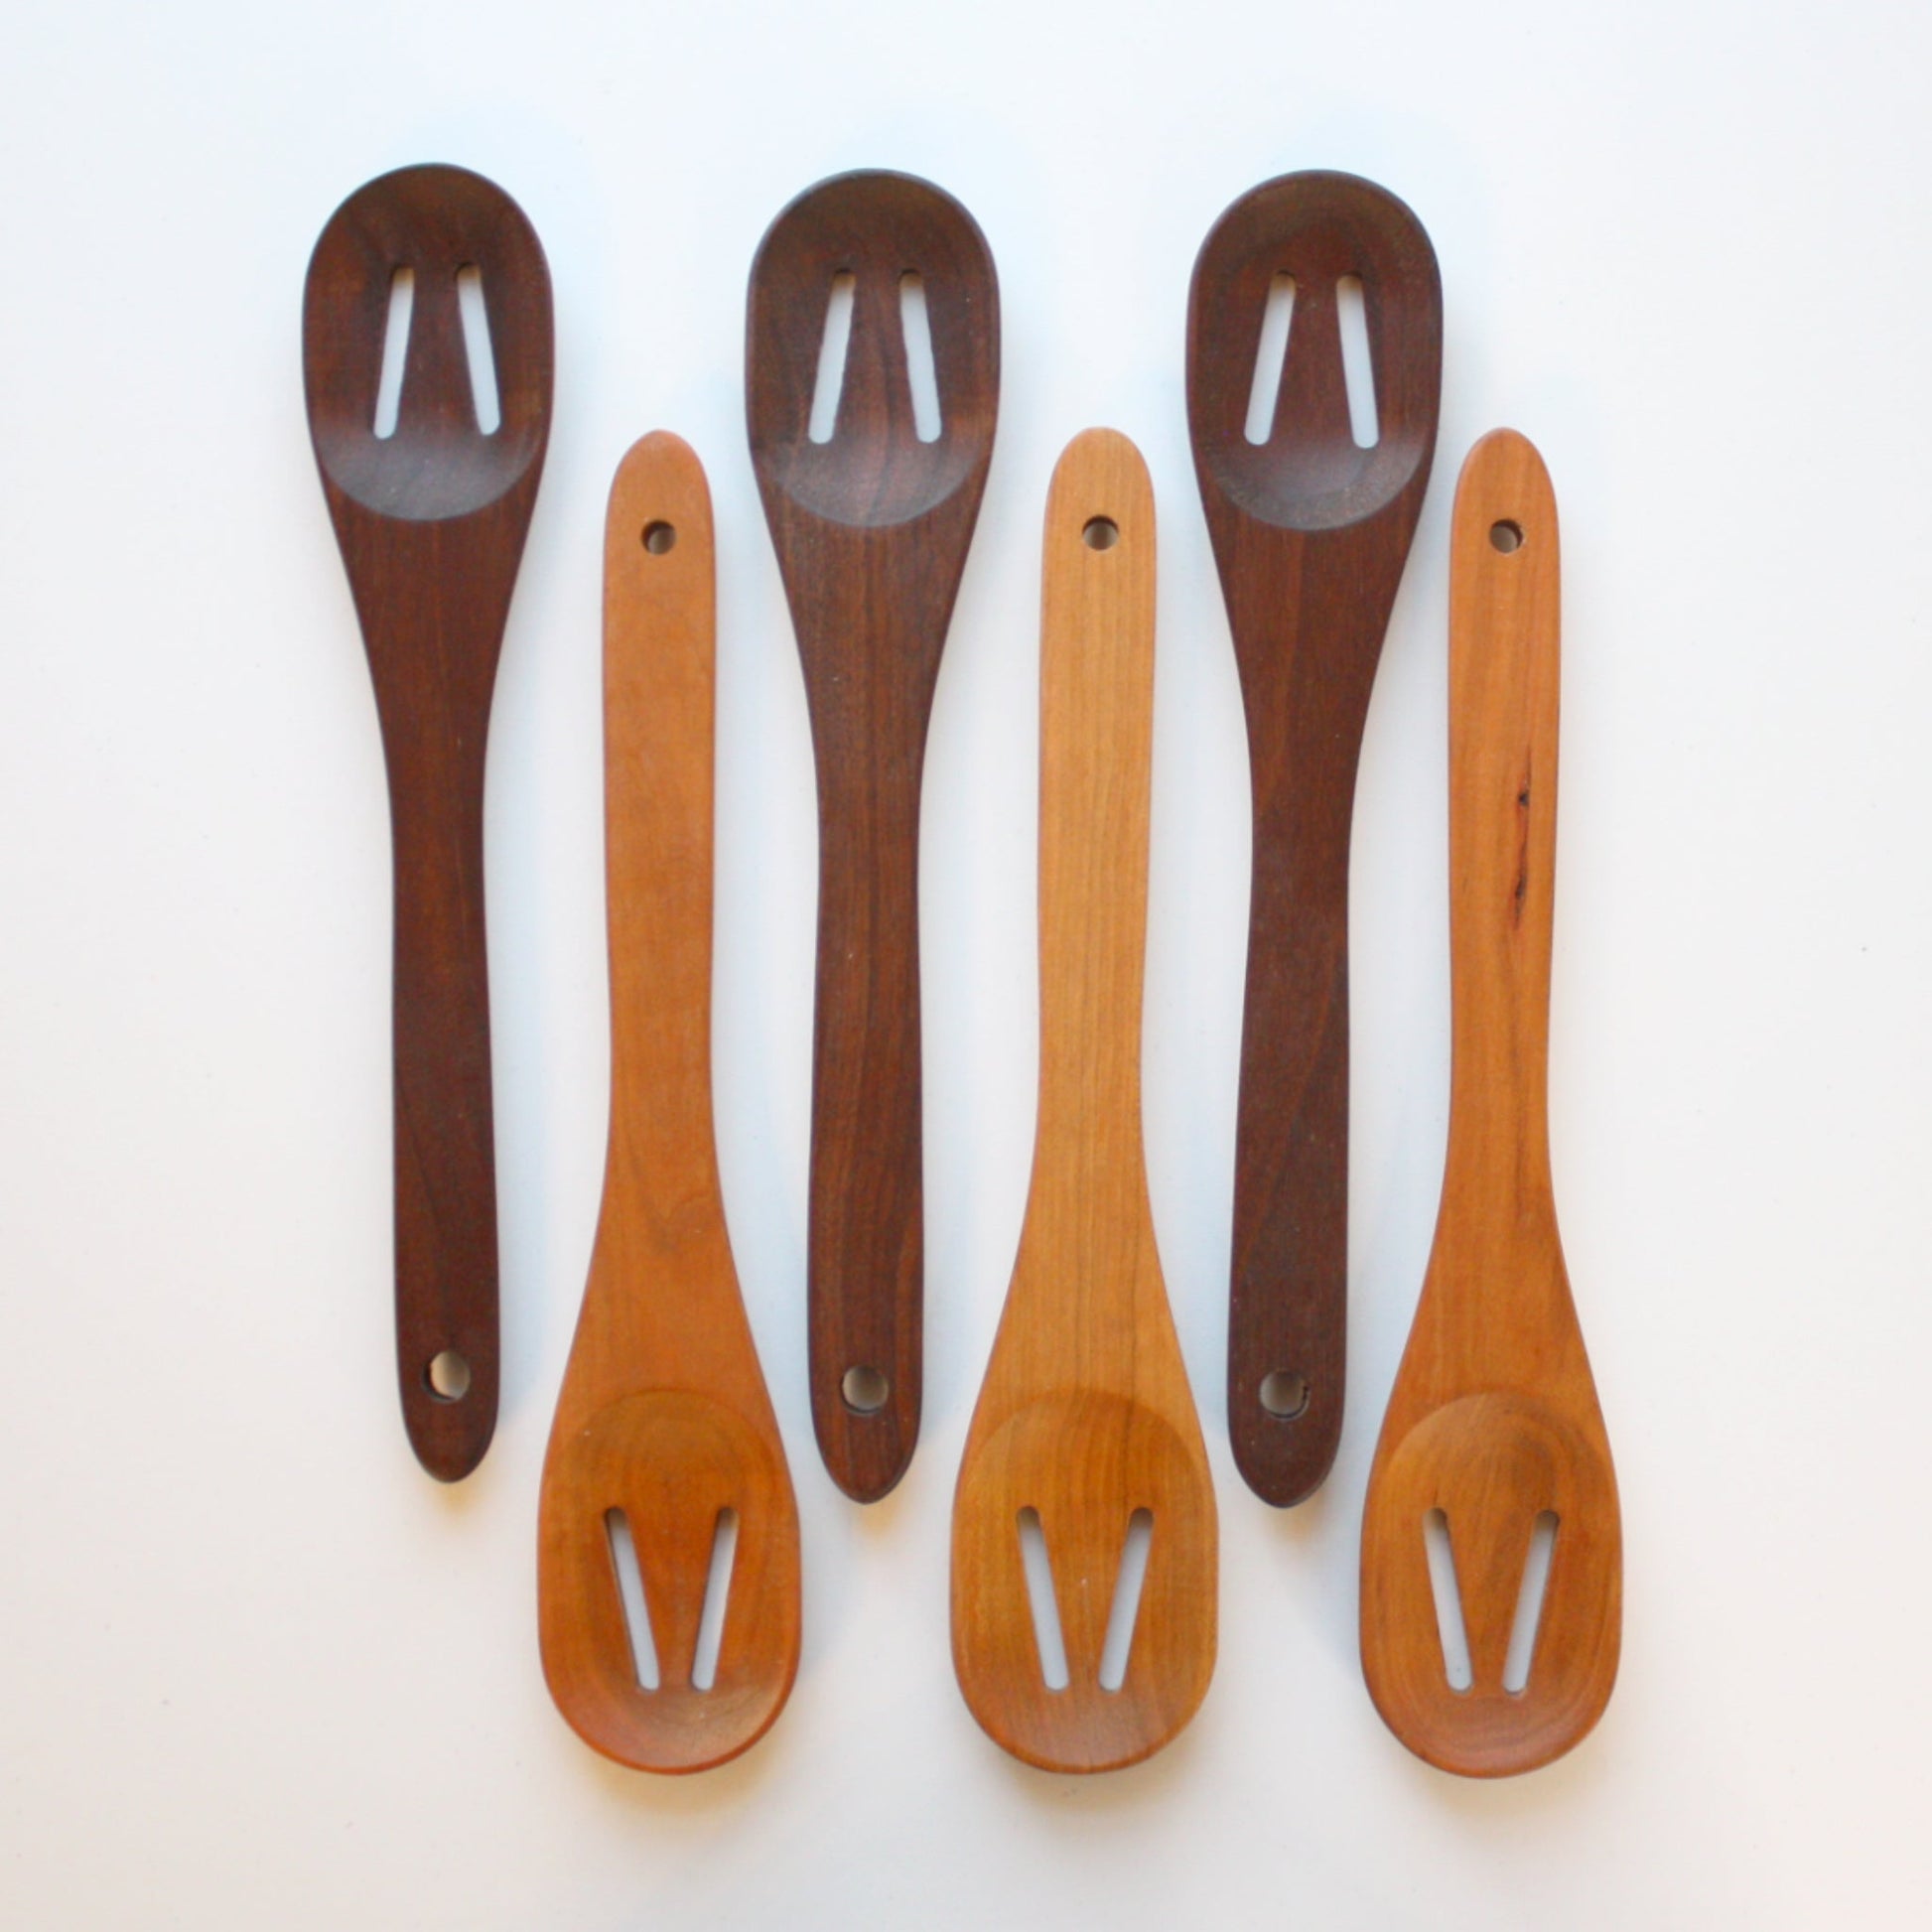 Handmade Everyday Slotted Wooden Spoon - Made in the USA